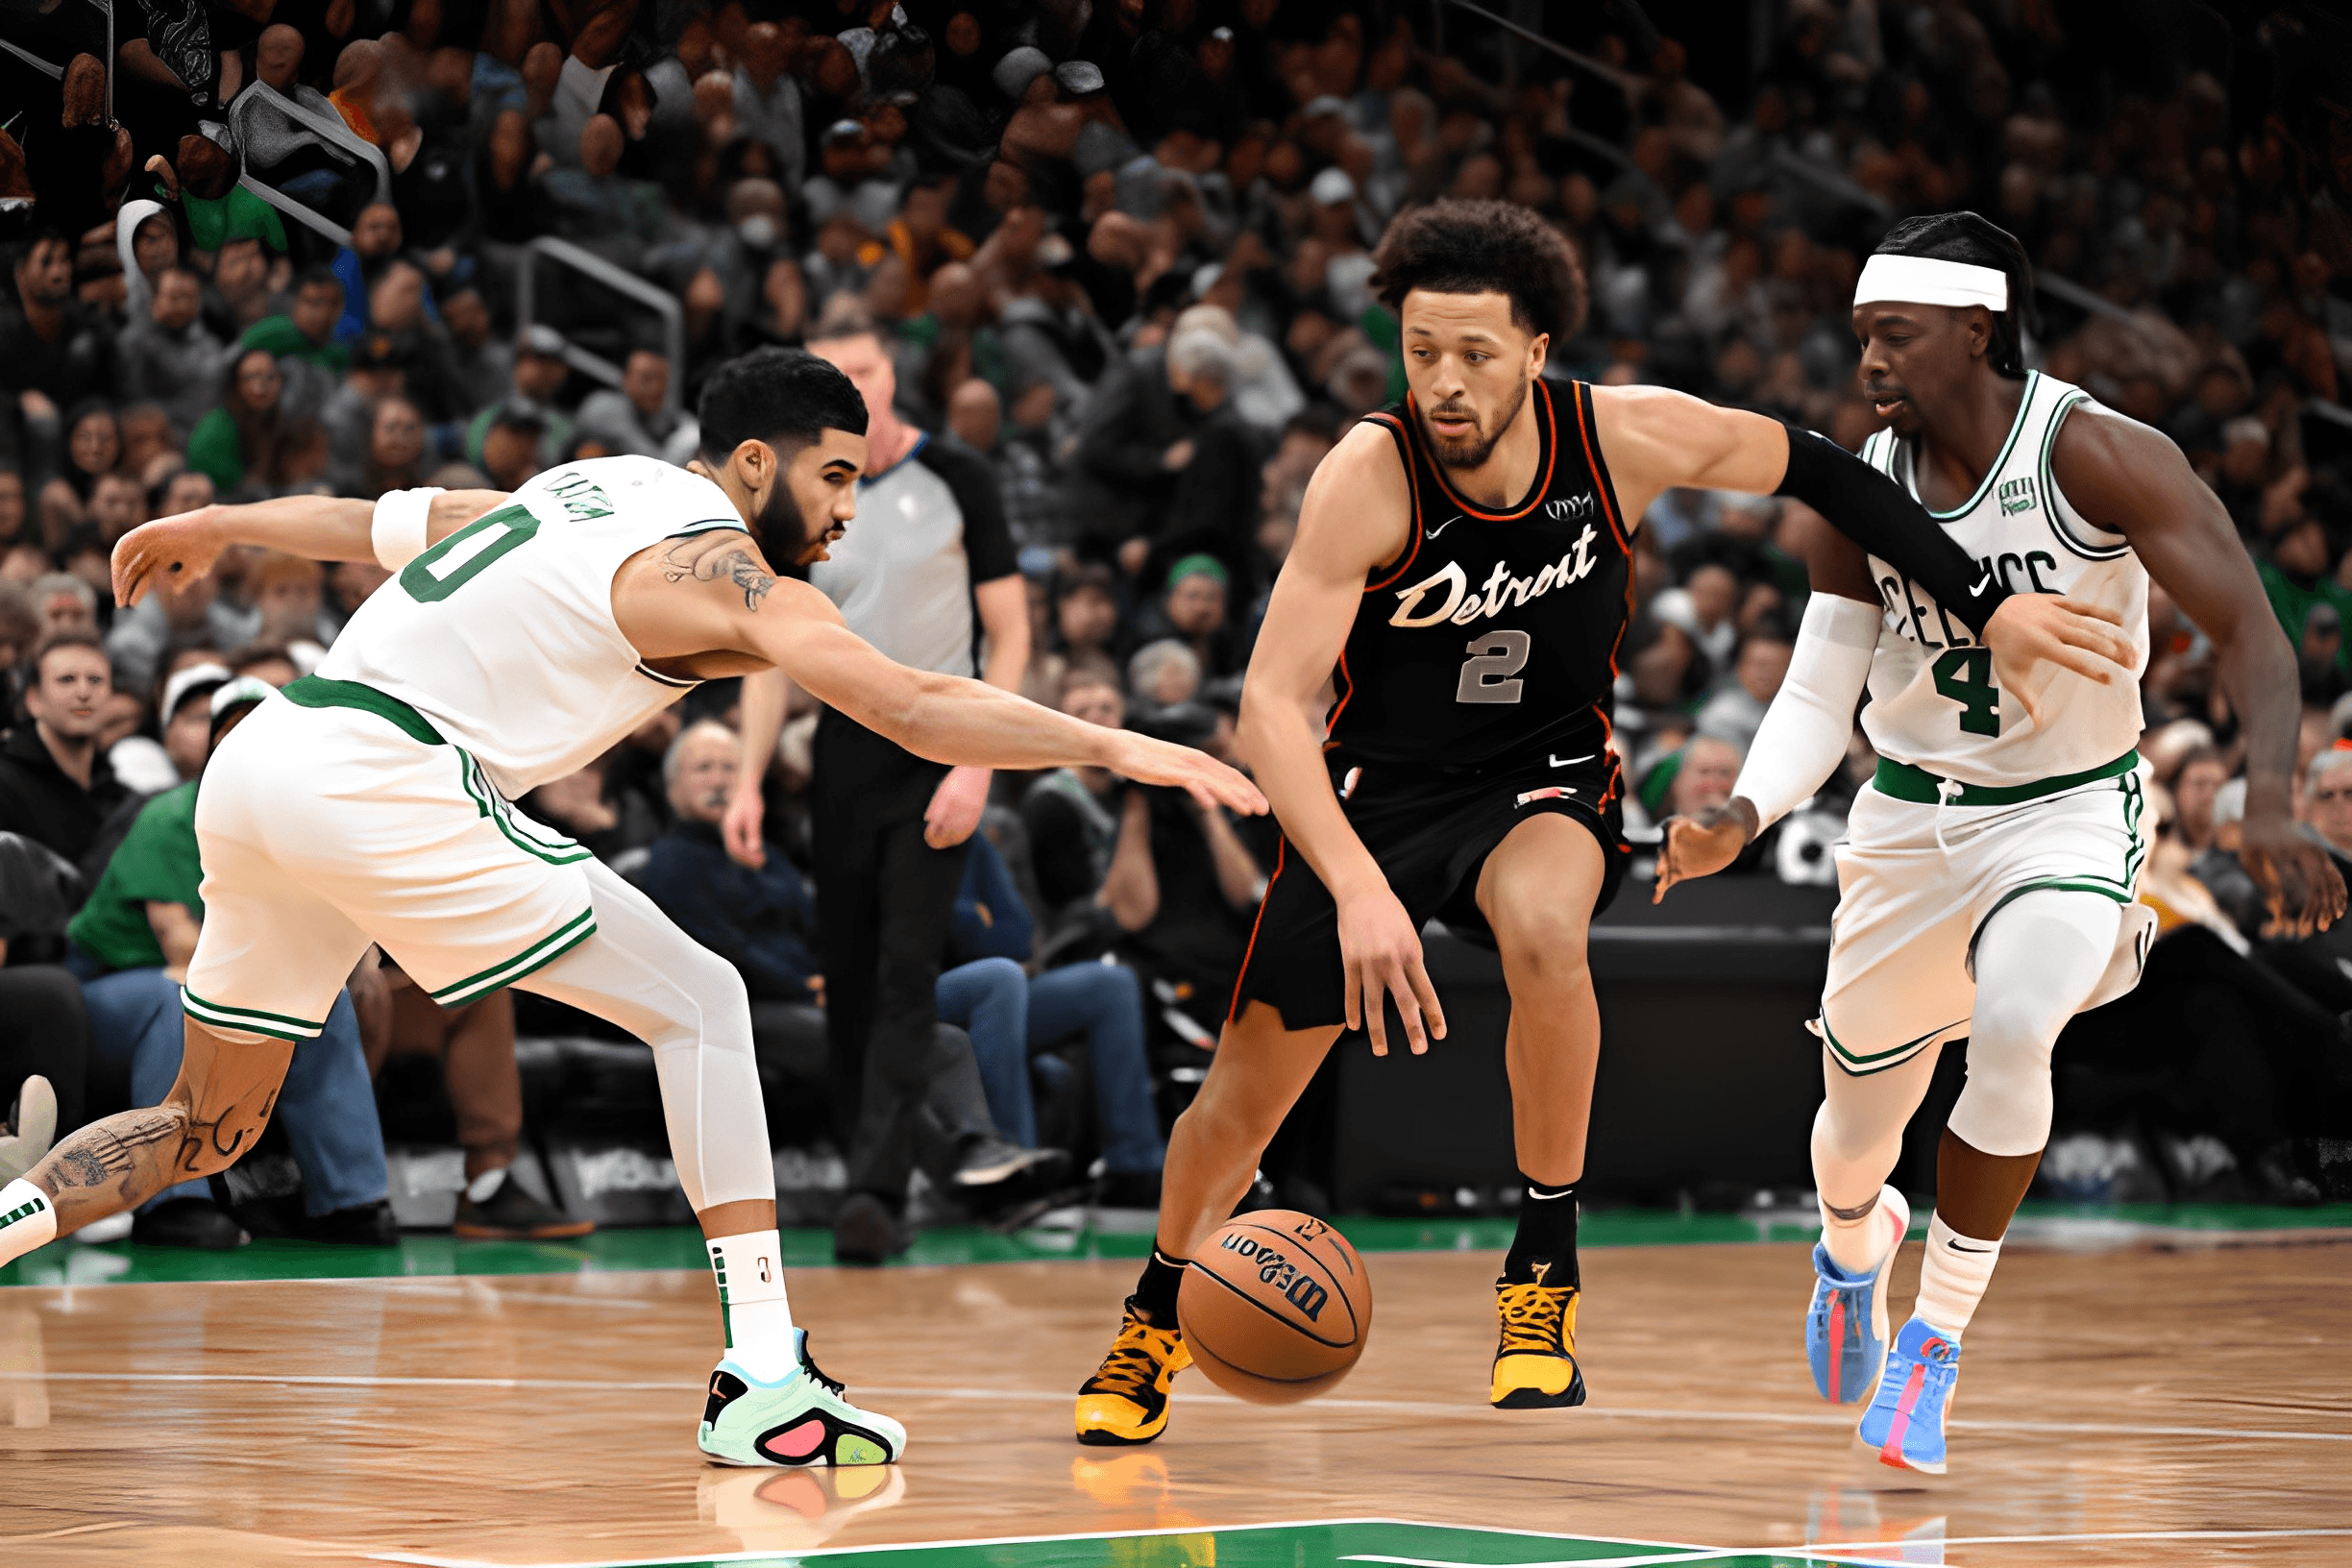 Cade Cunningham drives past Jayson Tatum and Jrue Holiday of the Celtics during a game at TD Garden in Boston.